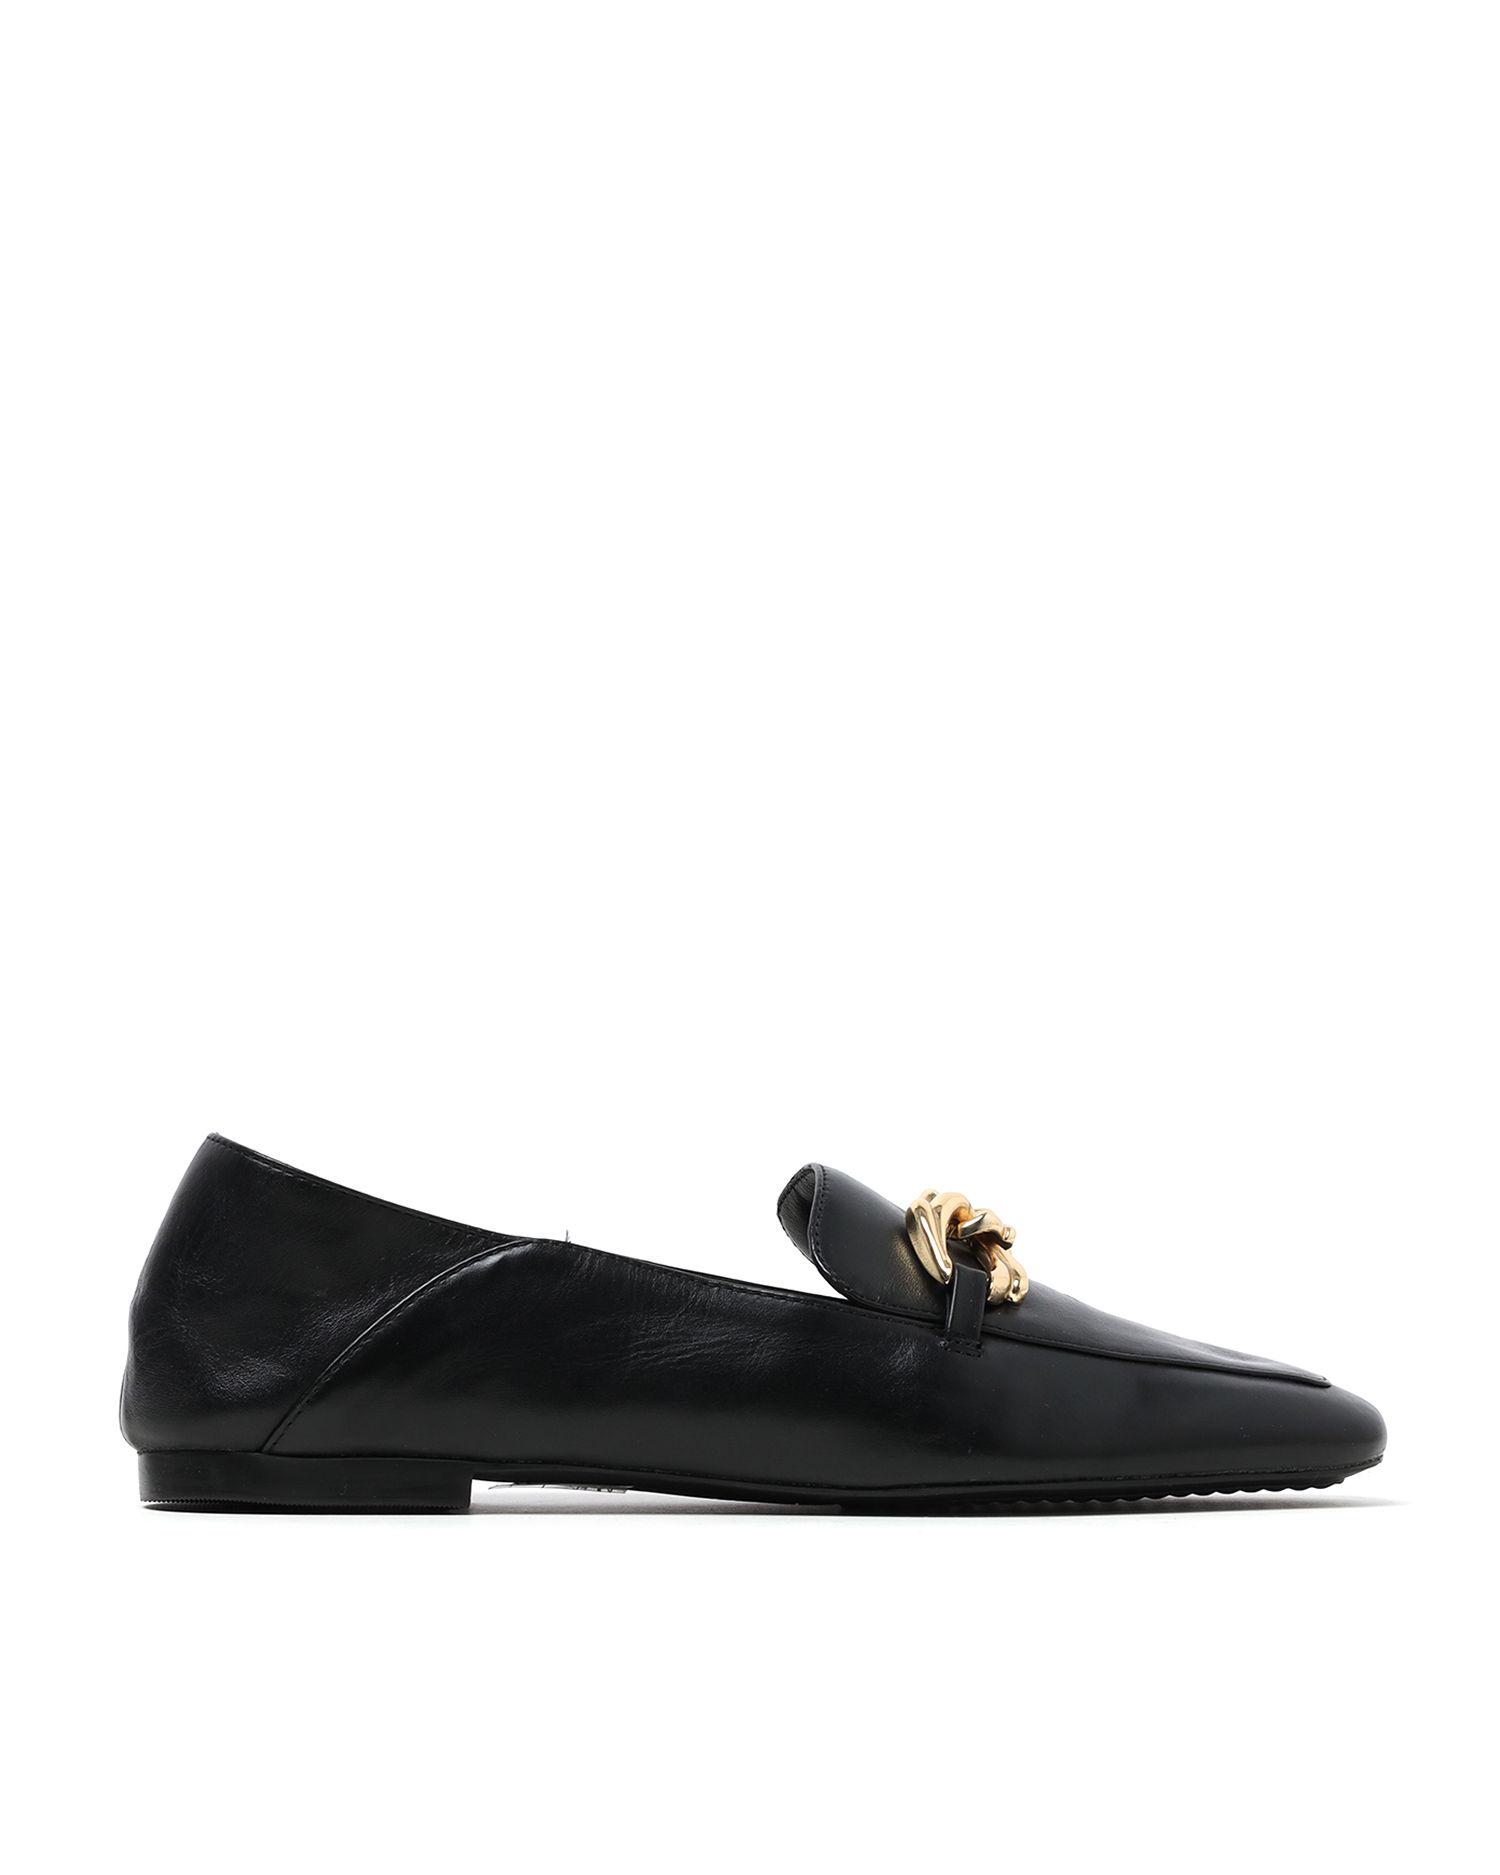 Chained loafers by AREZZO